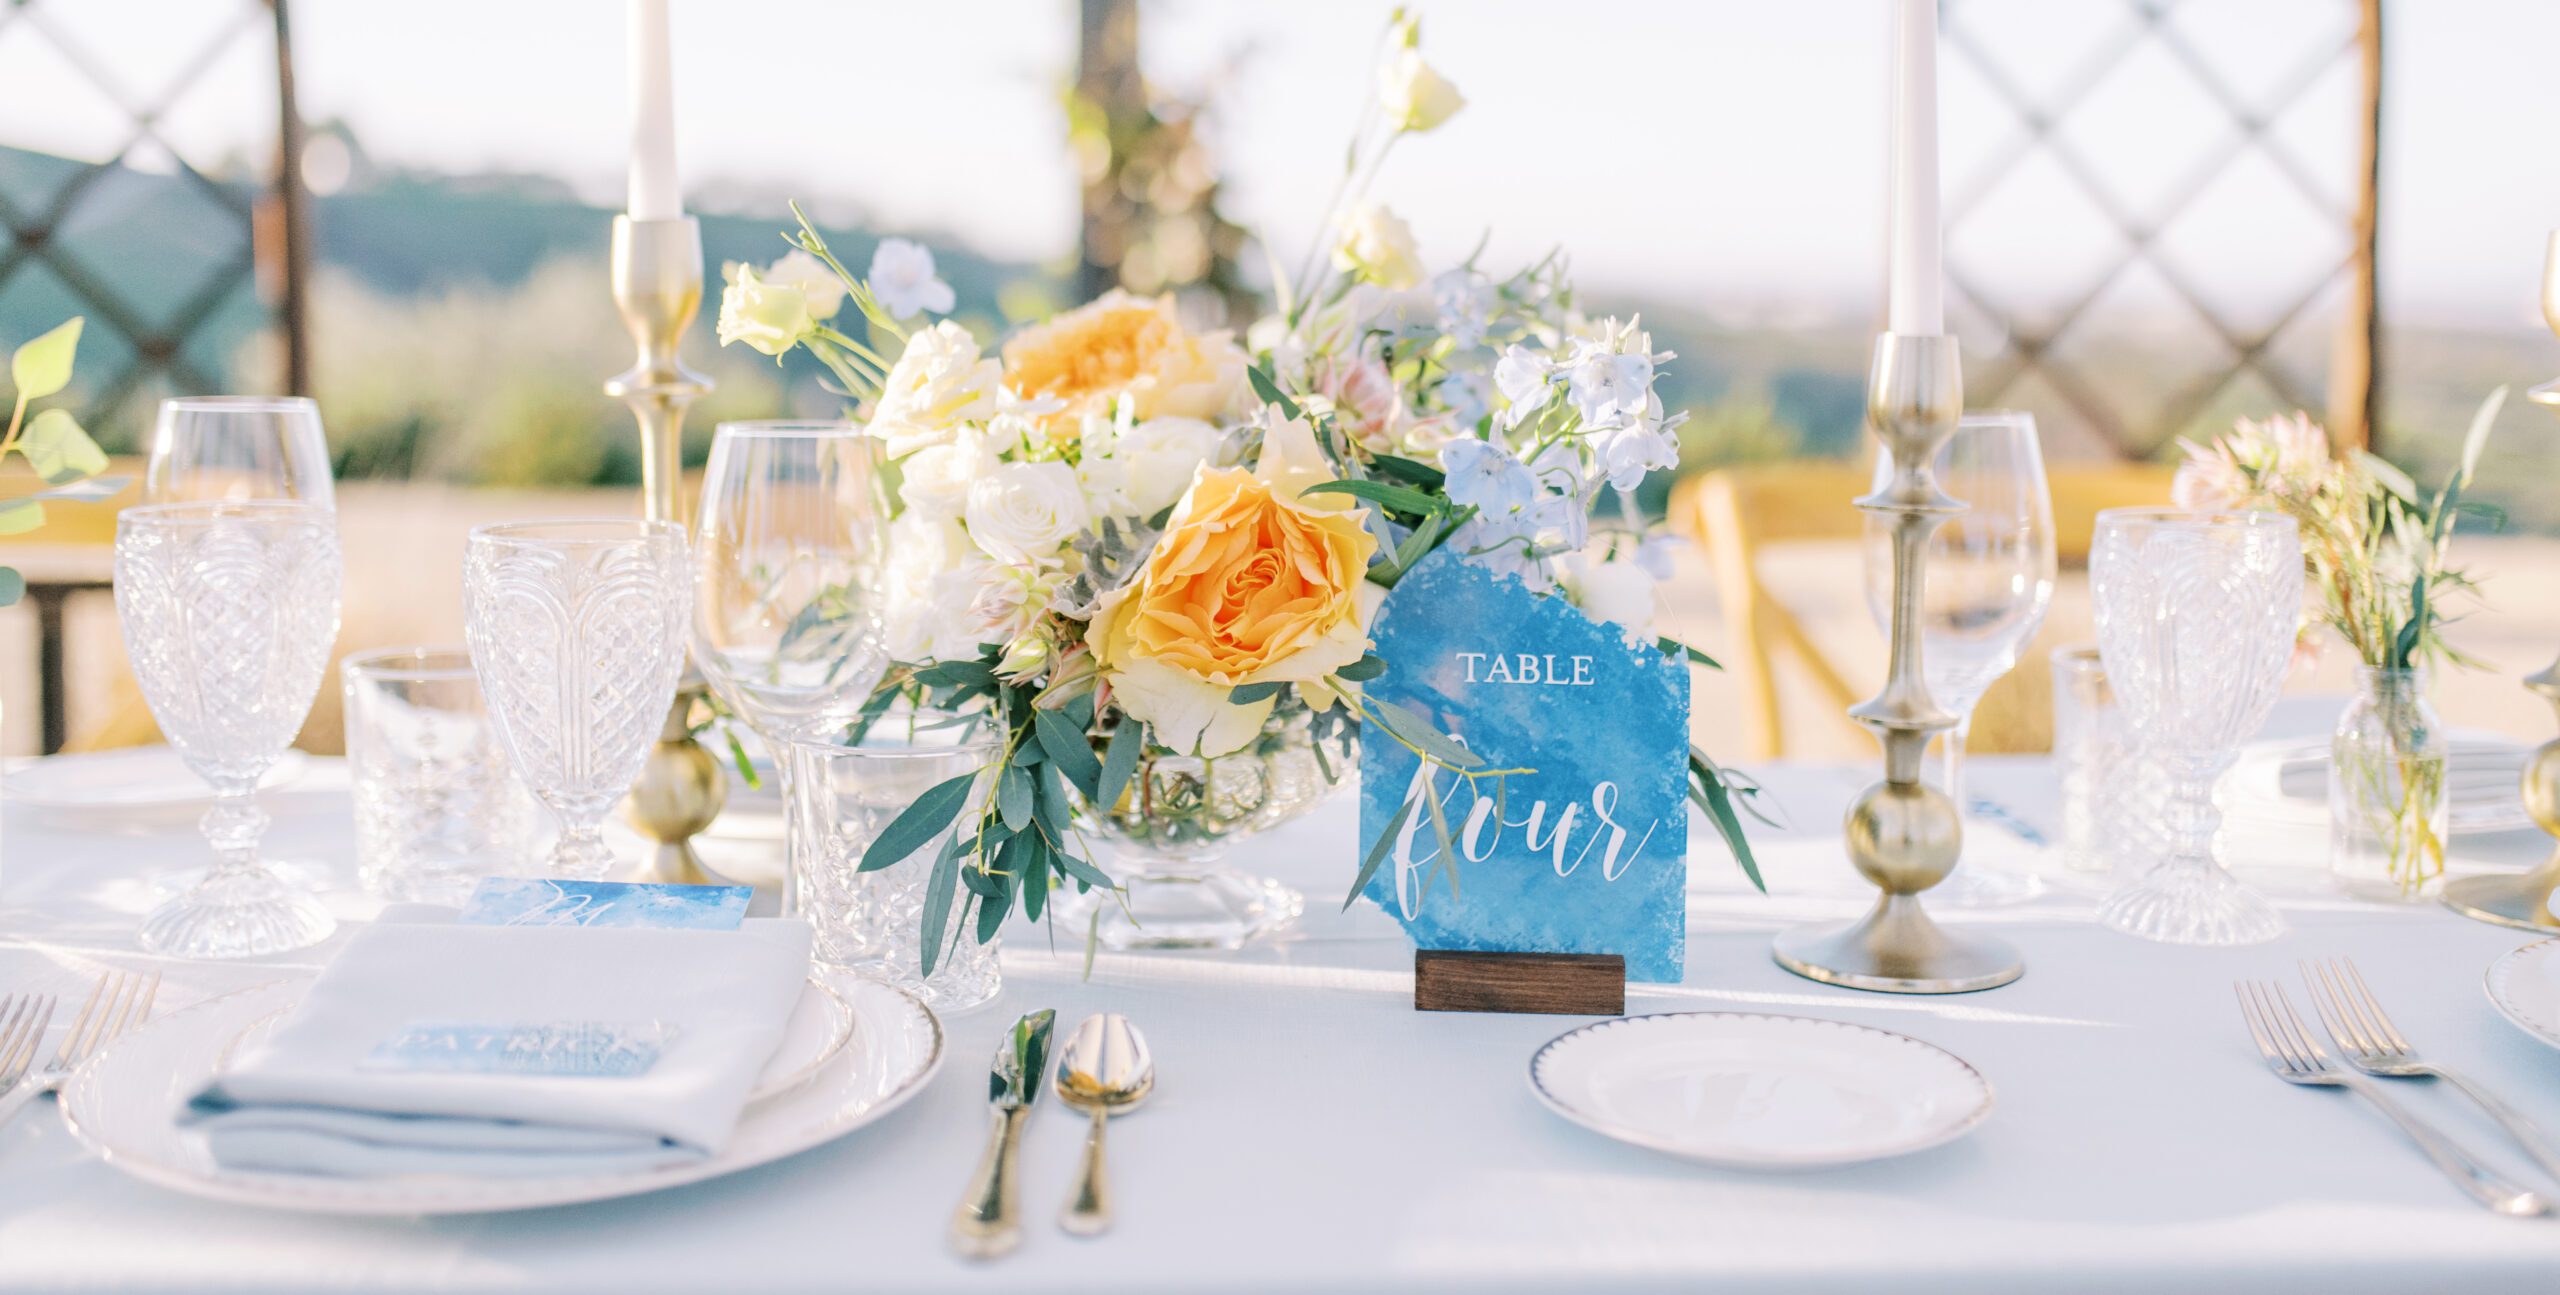 Beautiful watercolor blue and crystal clear glassware with accents of gold tablescape at Villa de Lucca, Templeton, CA planned by Outer Banks Wedding Planner, Jenna Nichols of Better2gether Events